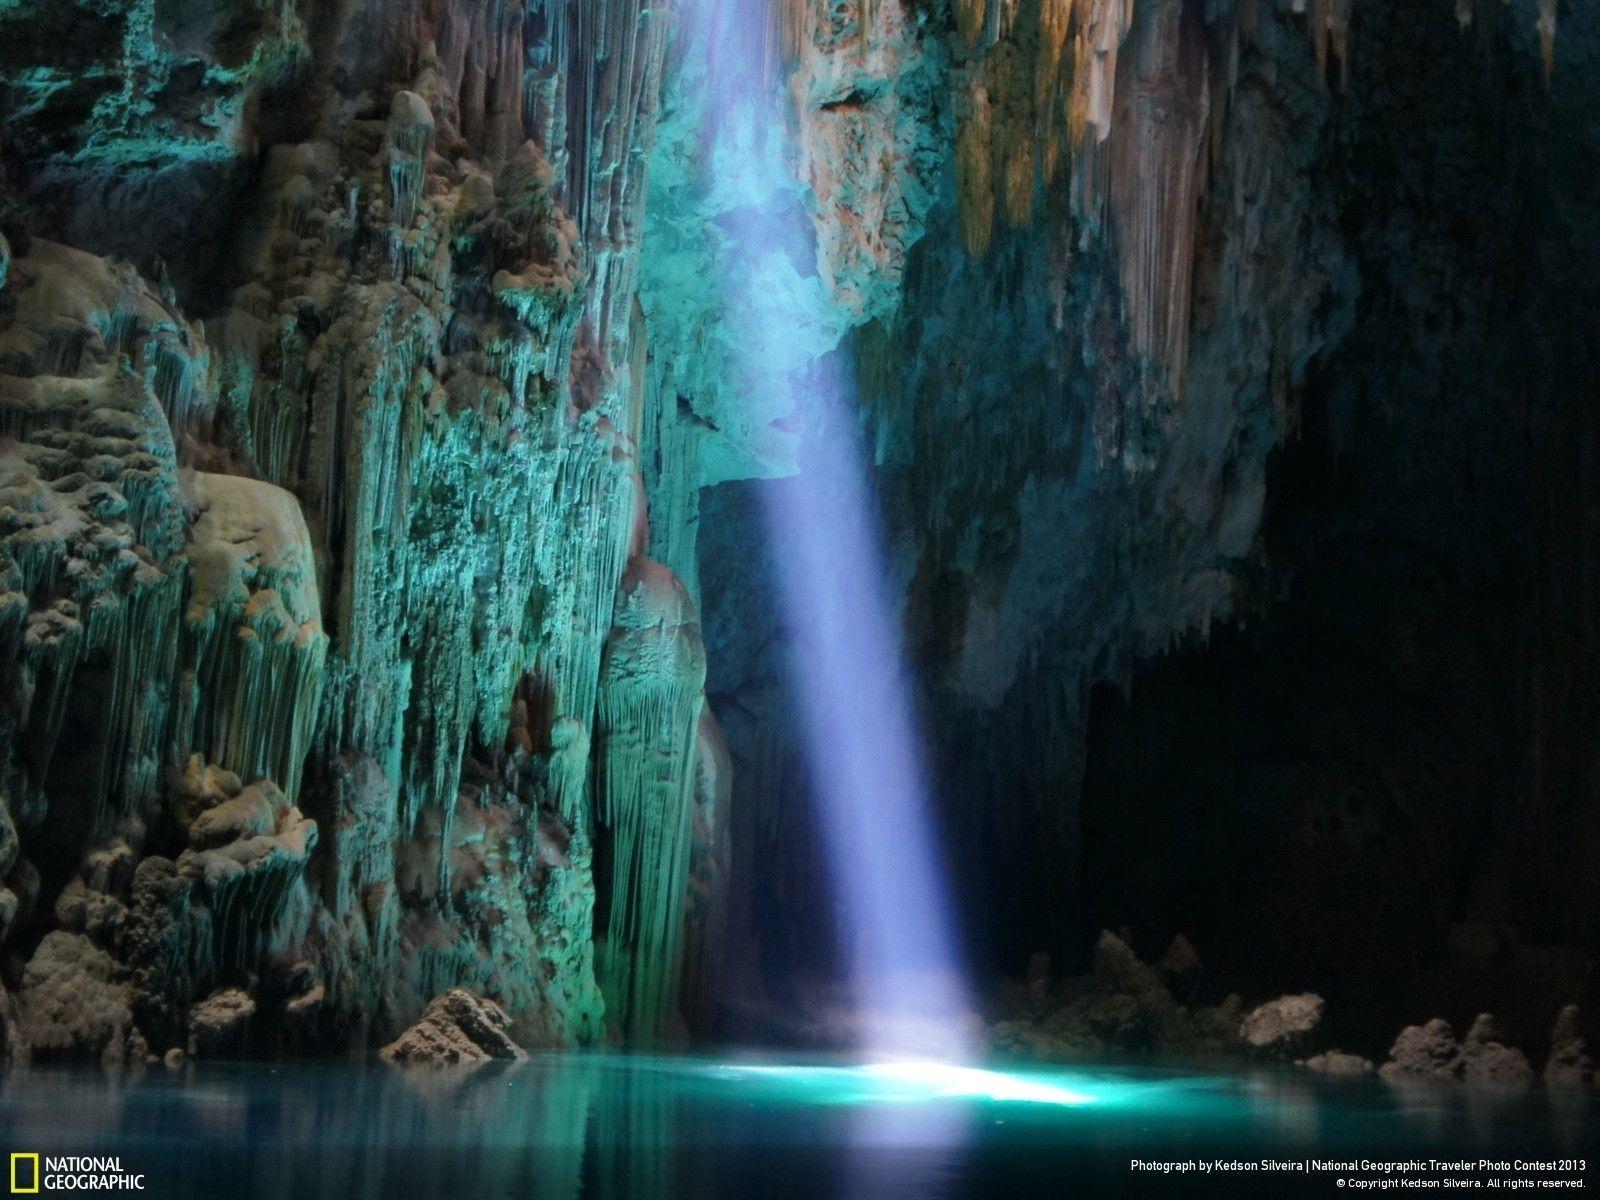 Brazil national geographic caves discovery lakes wallpaper